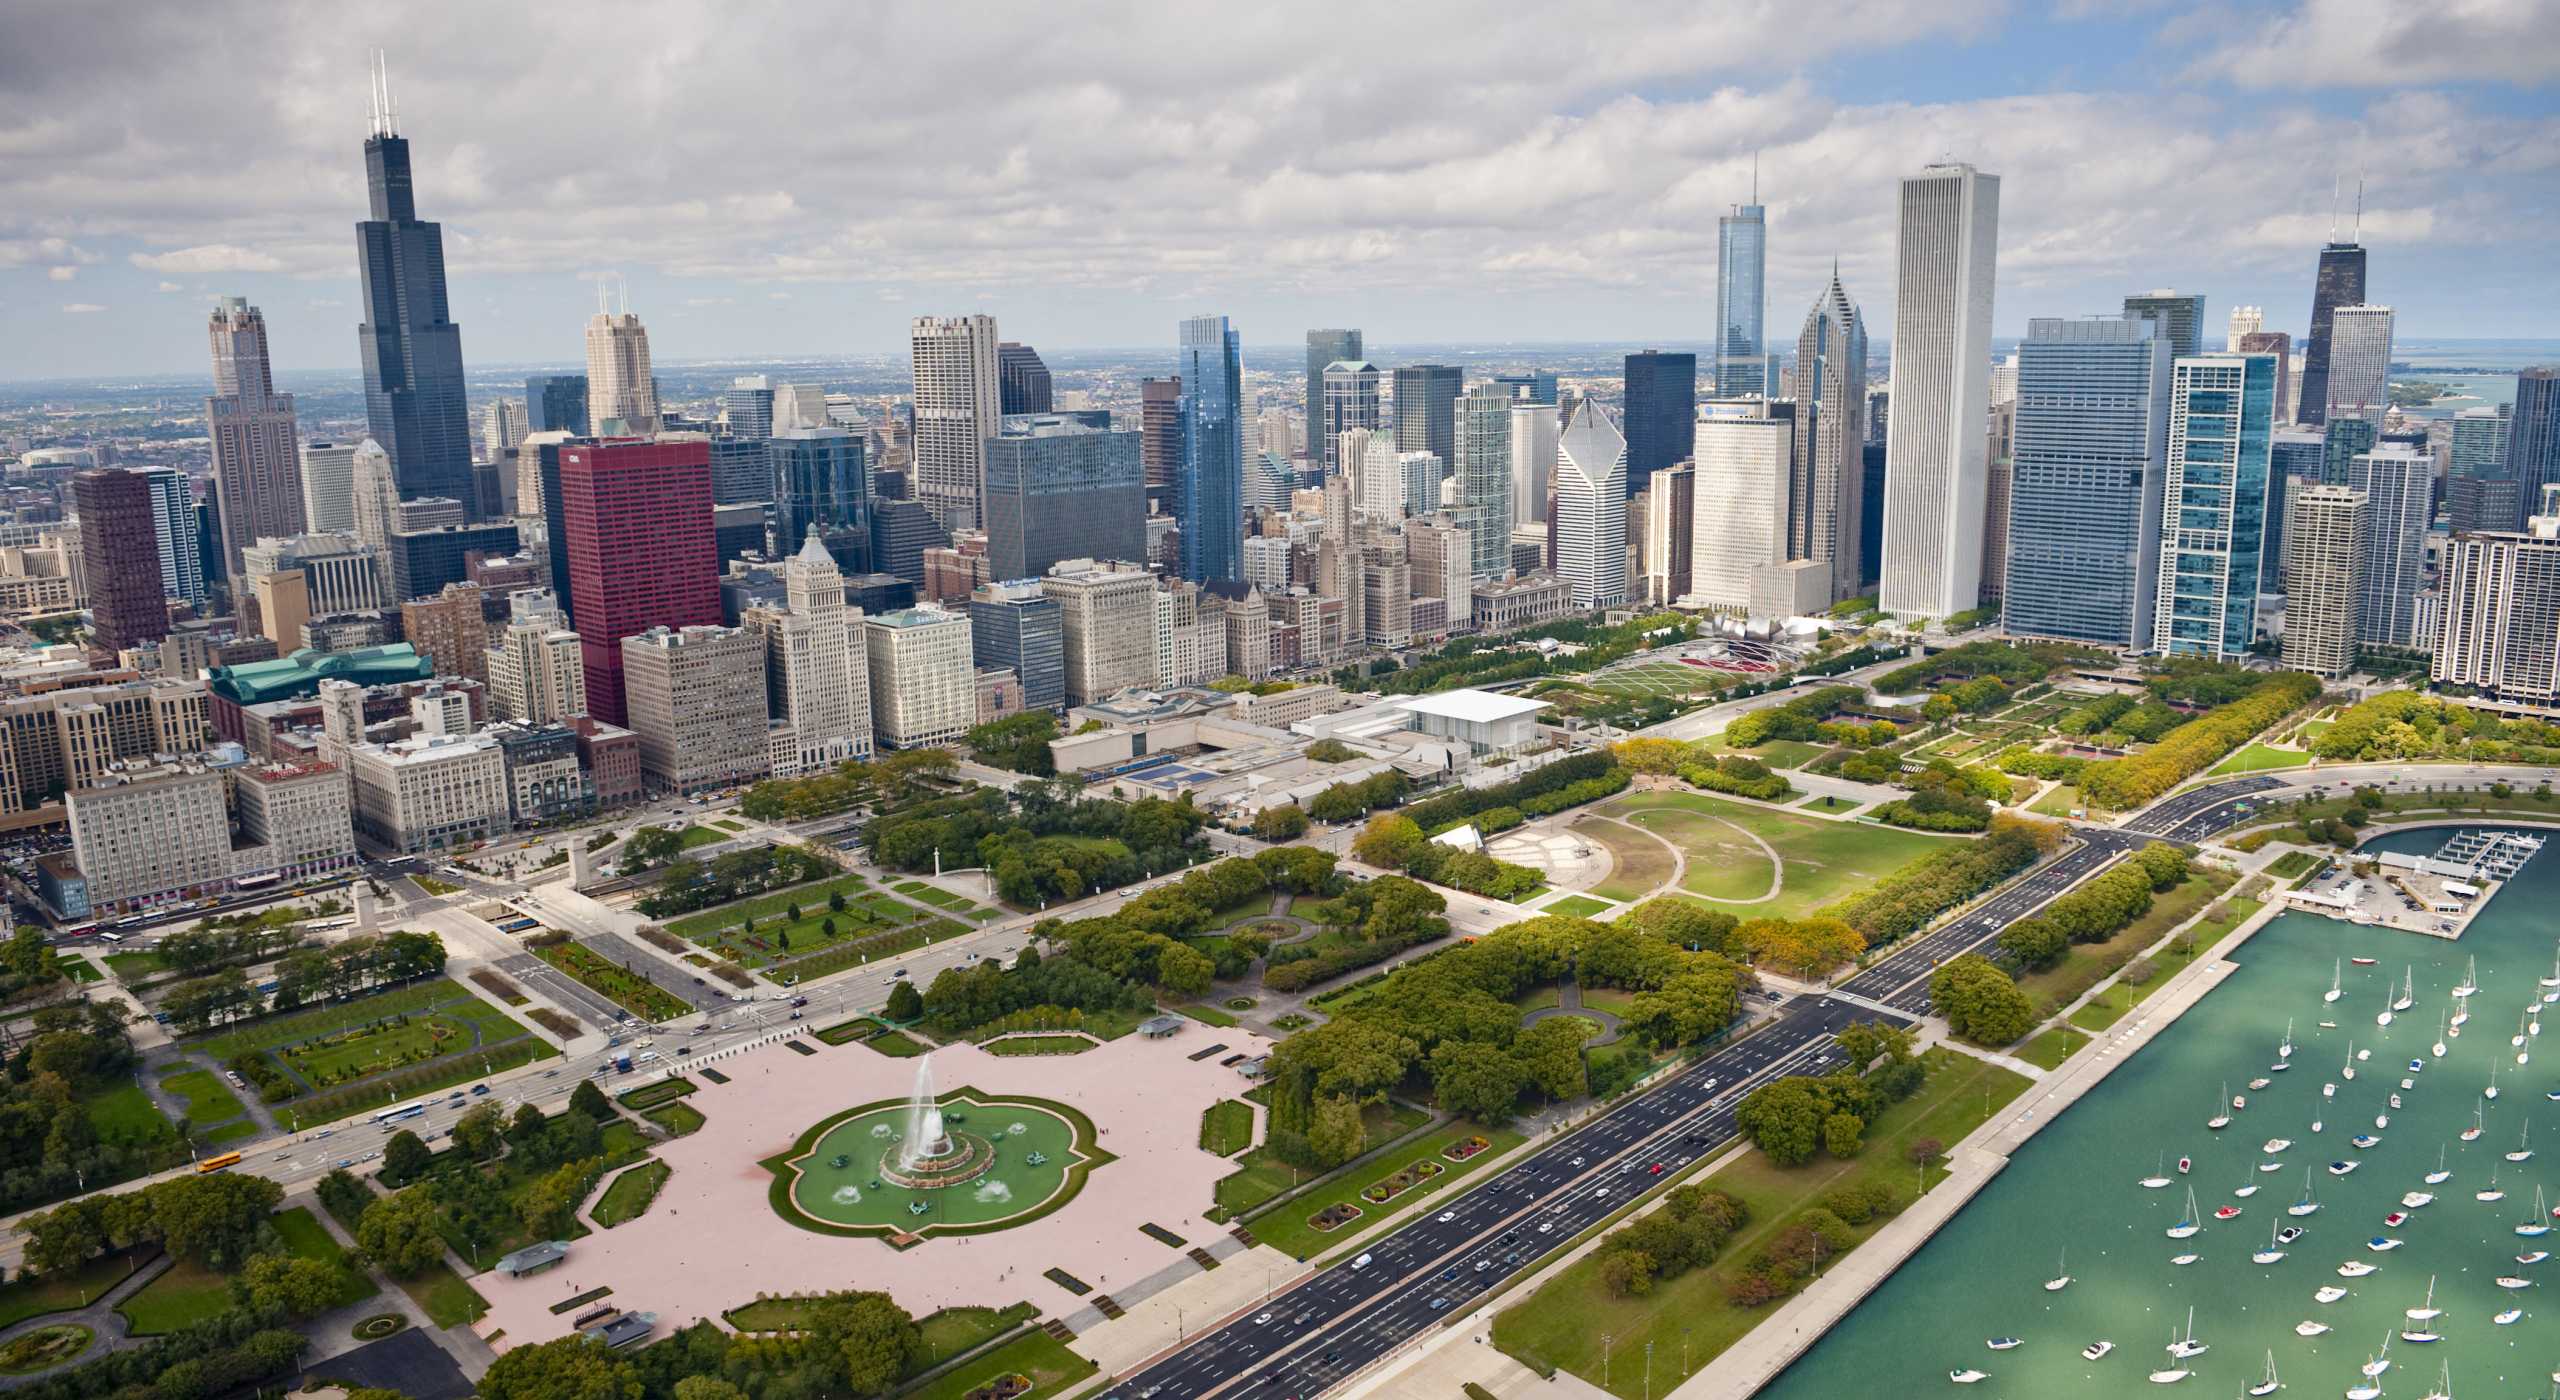 Top 10 non touristy things to do in Chicago